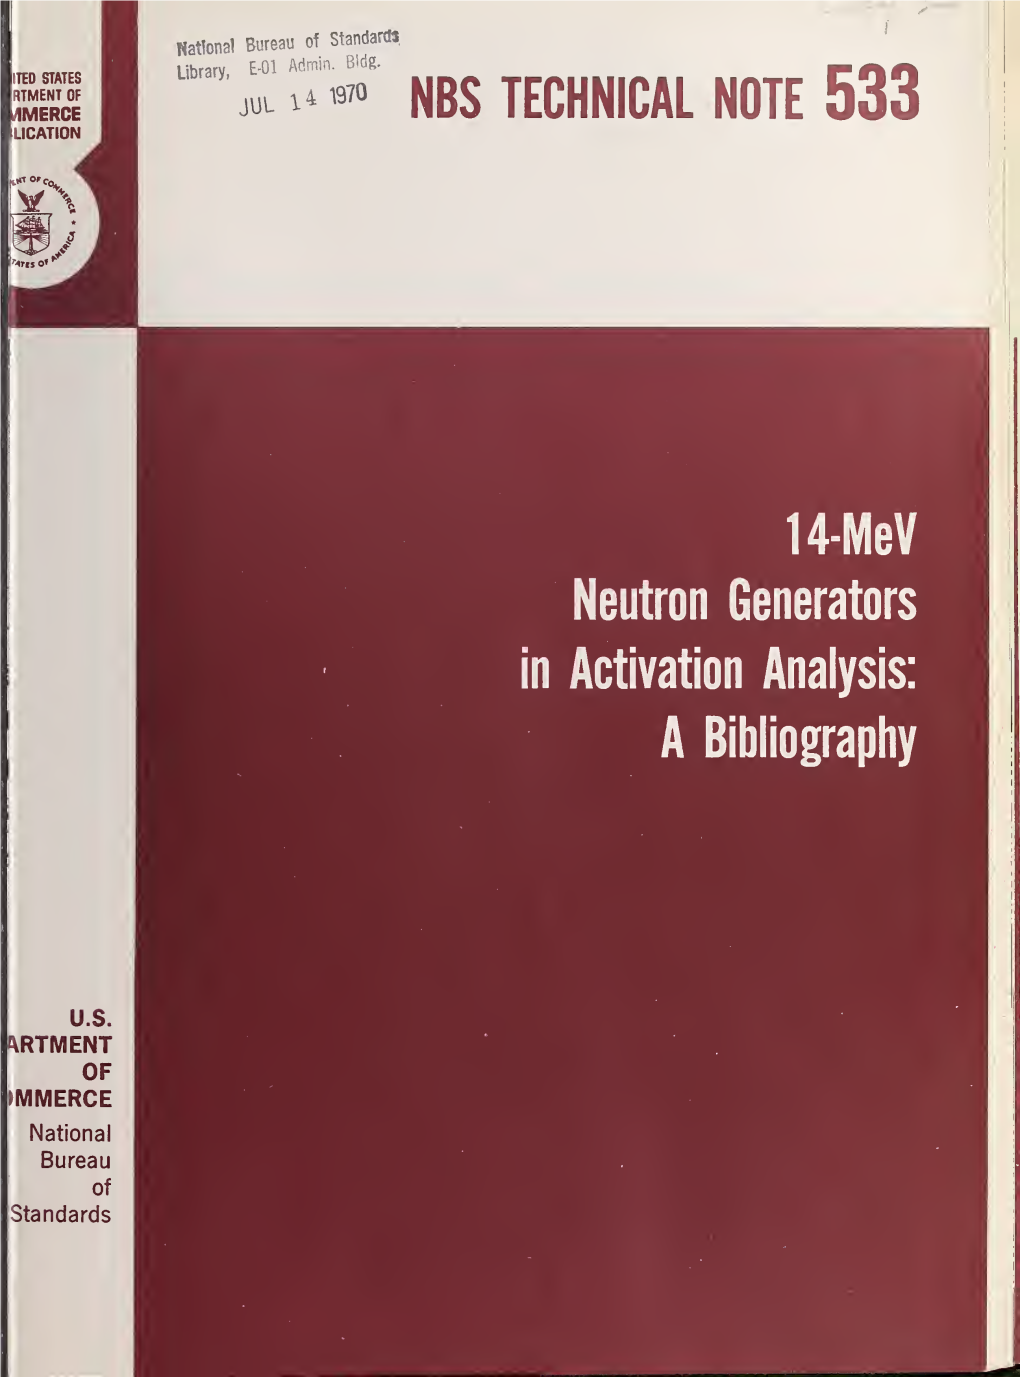 14-Mev Neutron Generators in Activation Analysis: a Bibliography